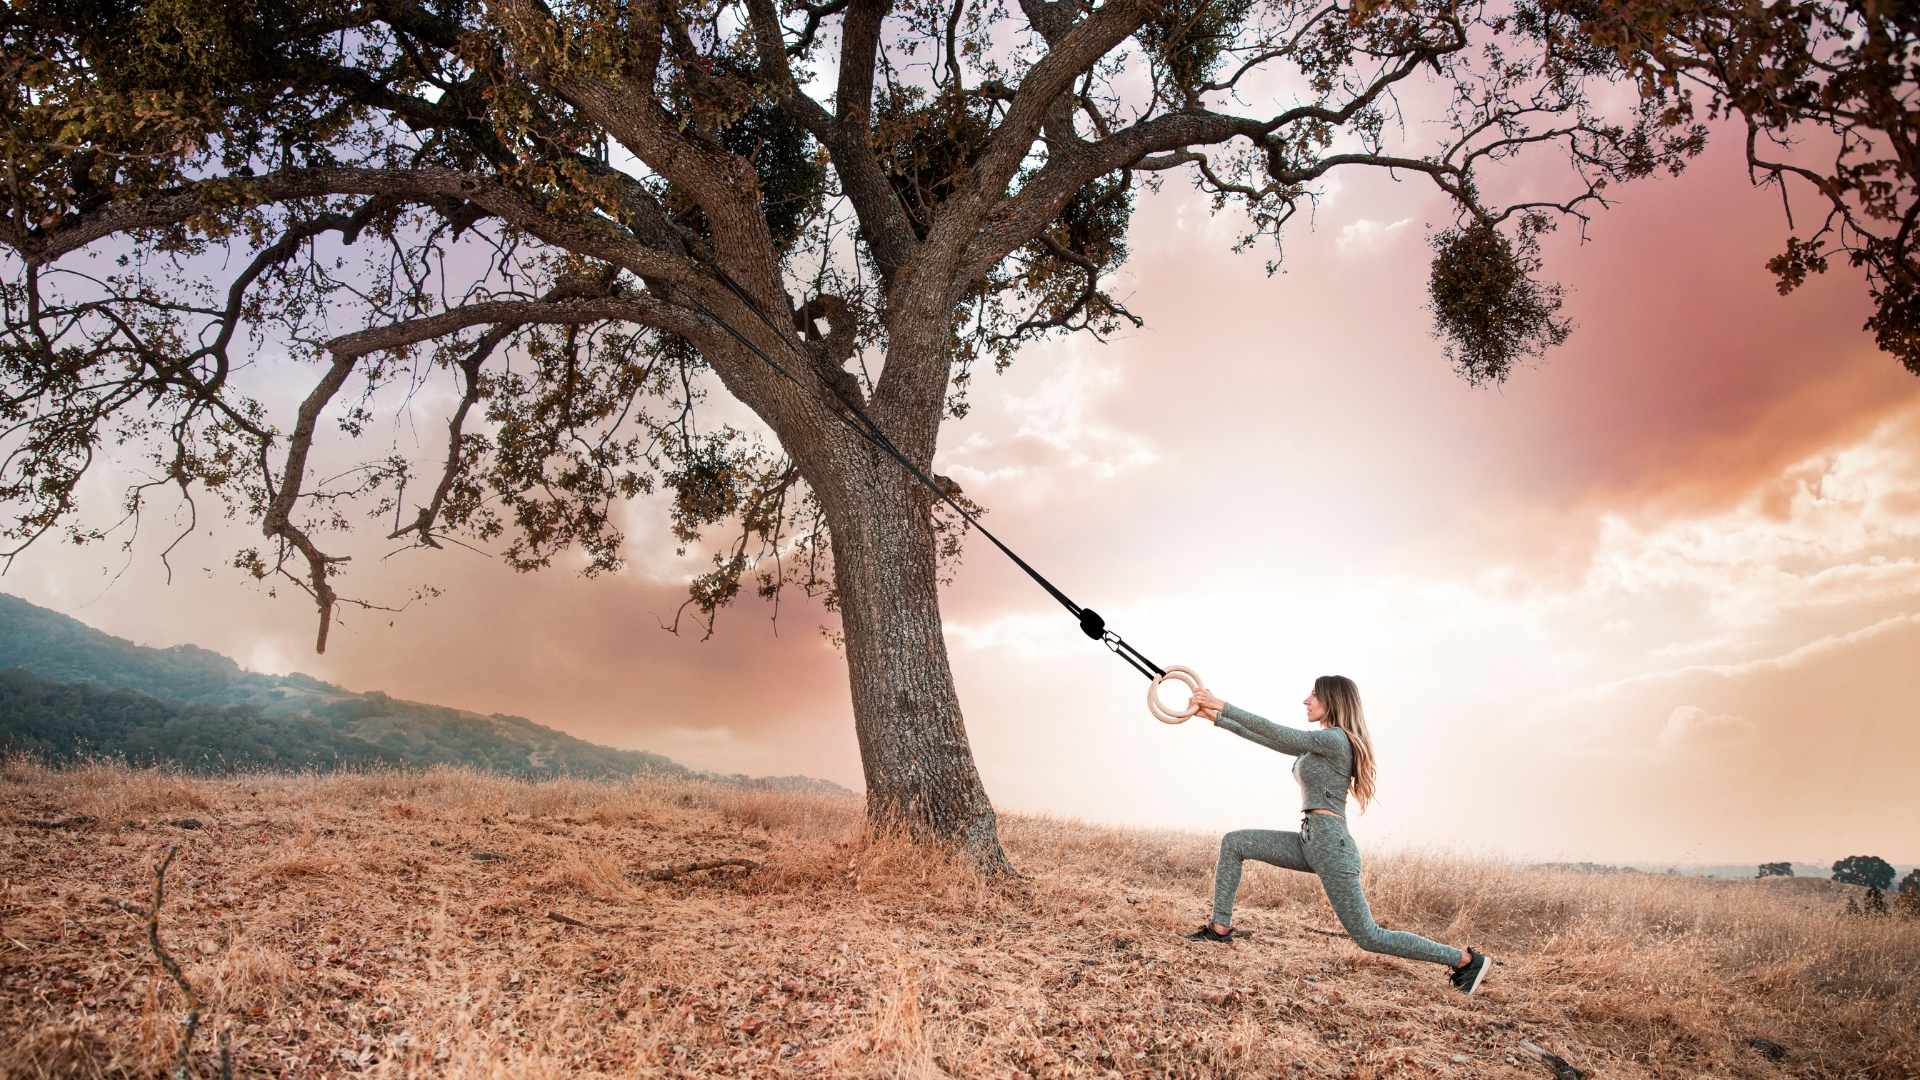 Image of the BGR being used by a woman at sunset using a tree